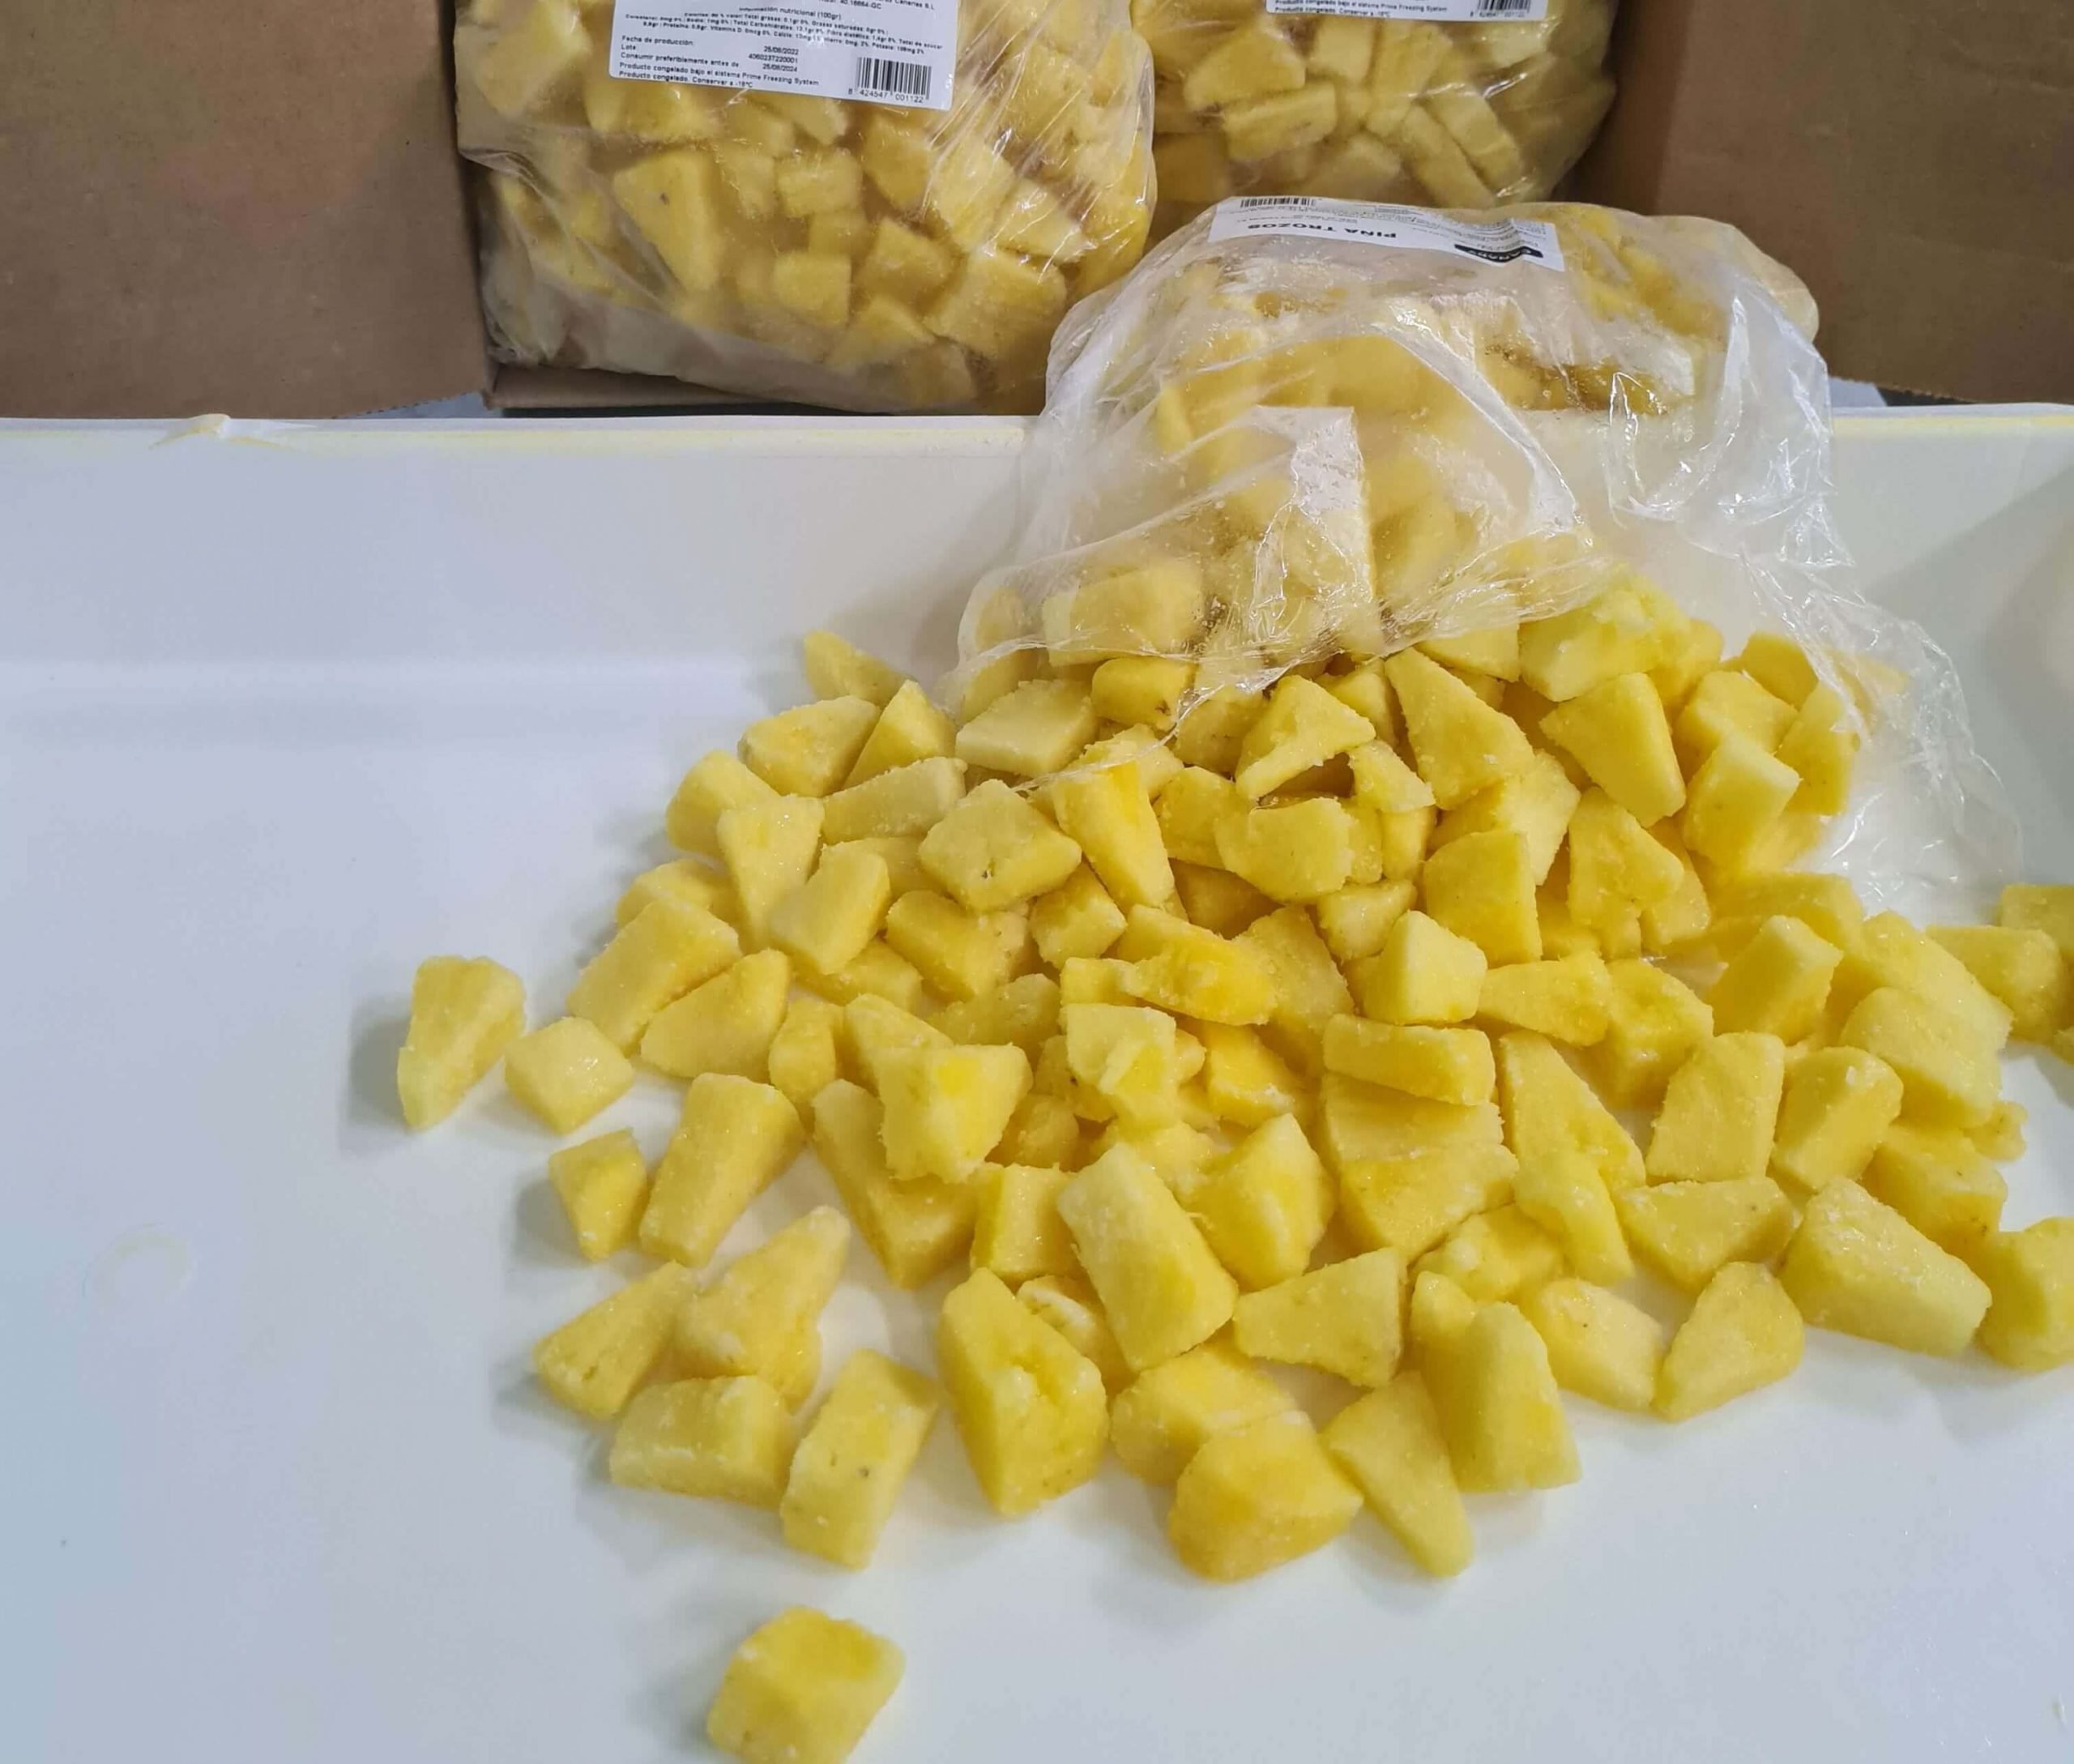 pfs frozen pineapple chunks iqf pineapple from costa rica